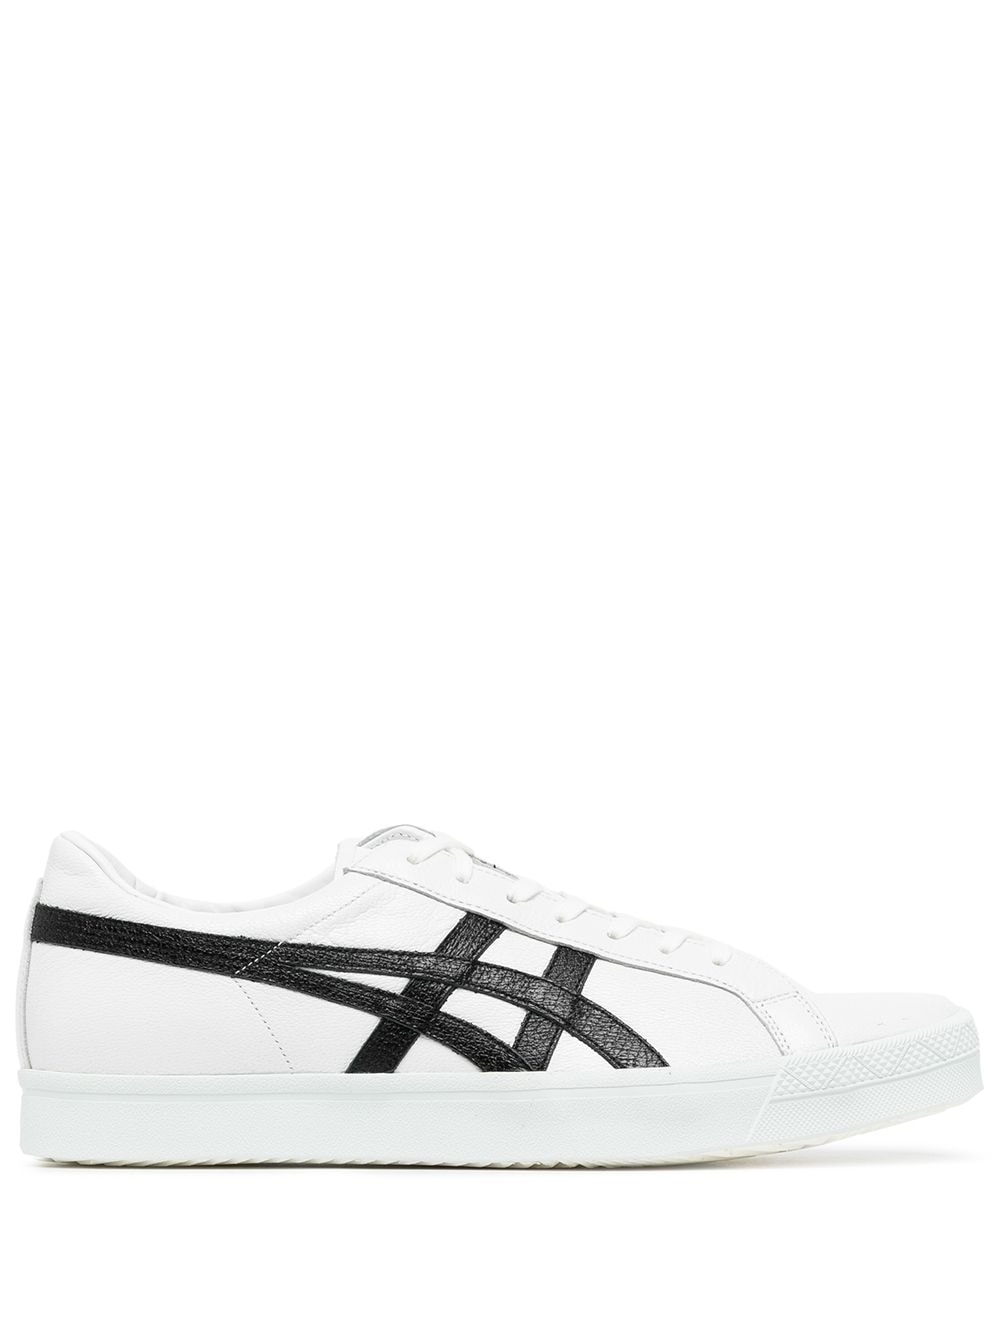 Onitsuka Tiger Fabre BL-S Sneakers - Weiß von Onitsuka Tiger